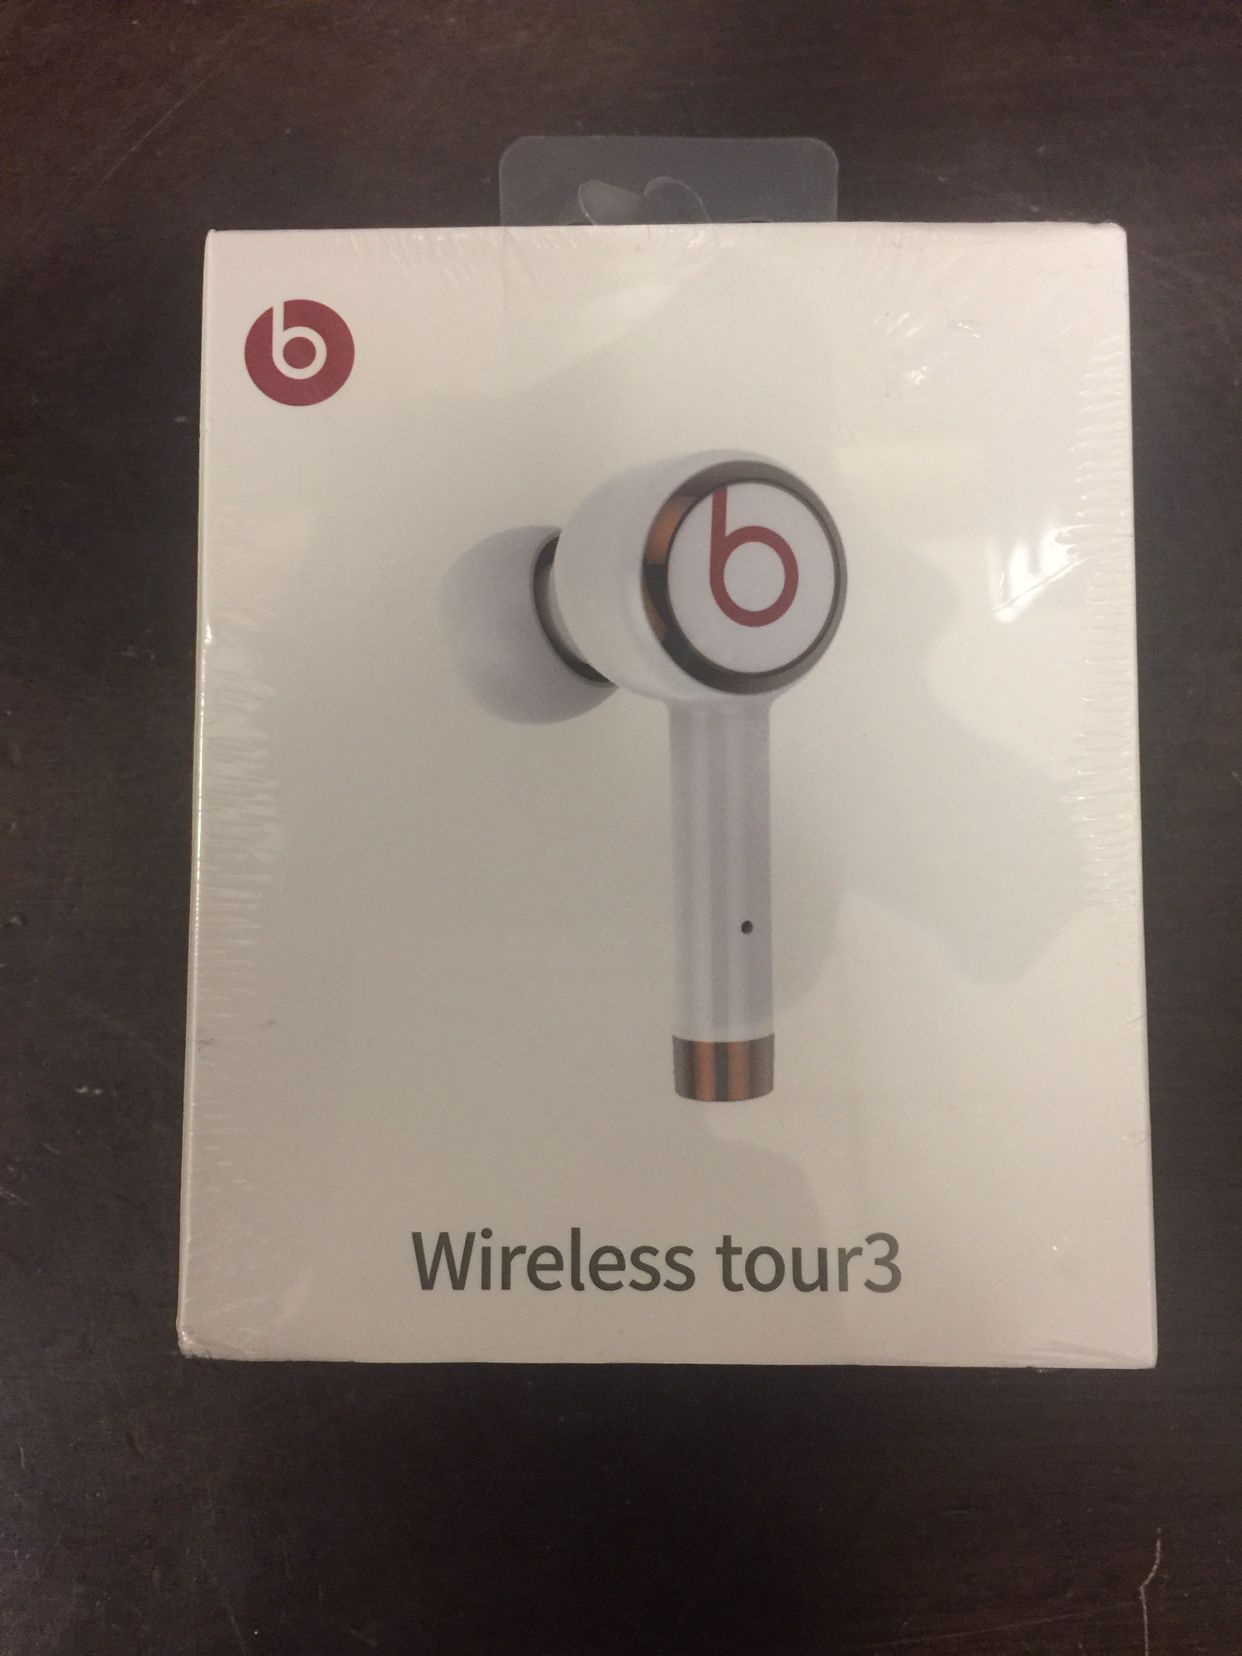 Beats Wireless Tour3, Wireless Earphones NEW in the box never opened Great Christmas